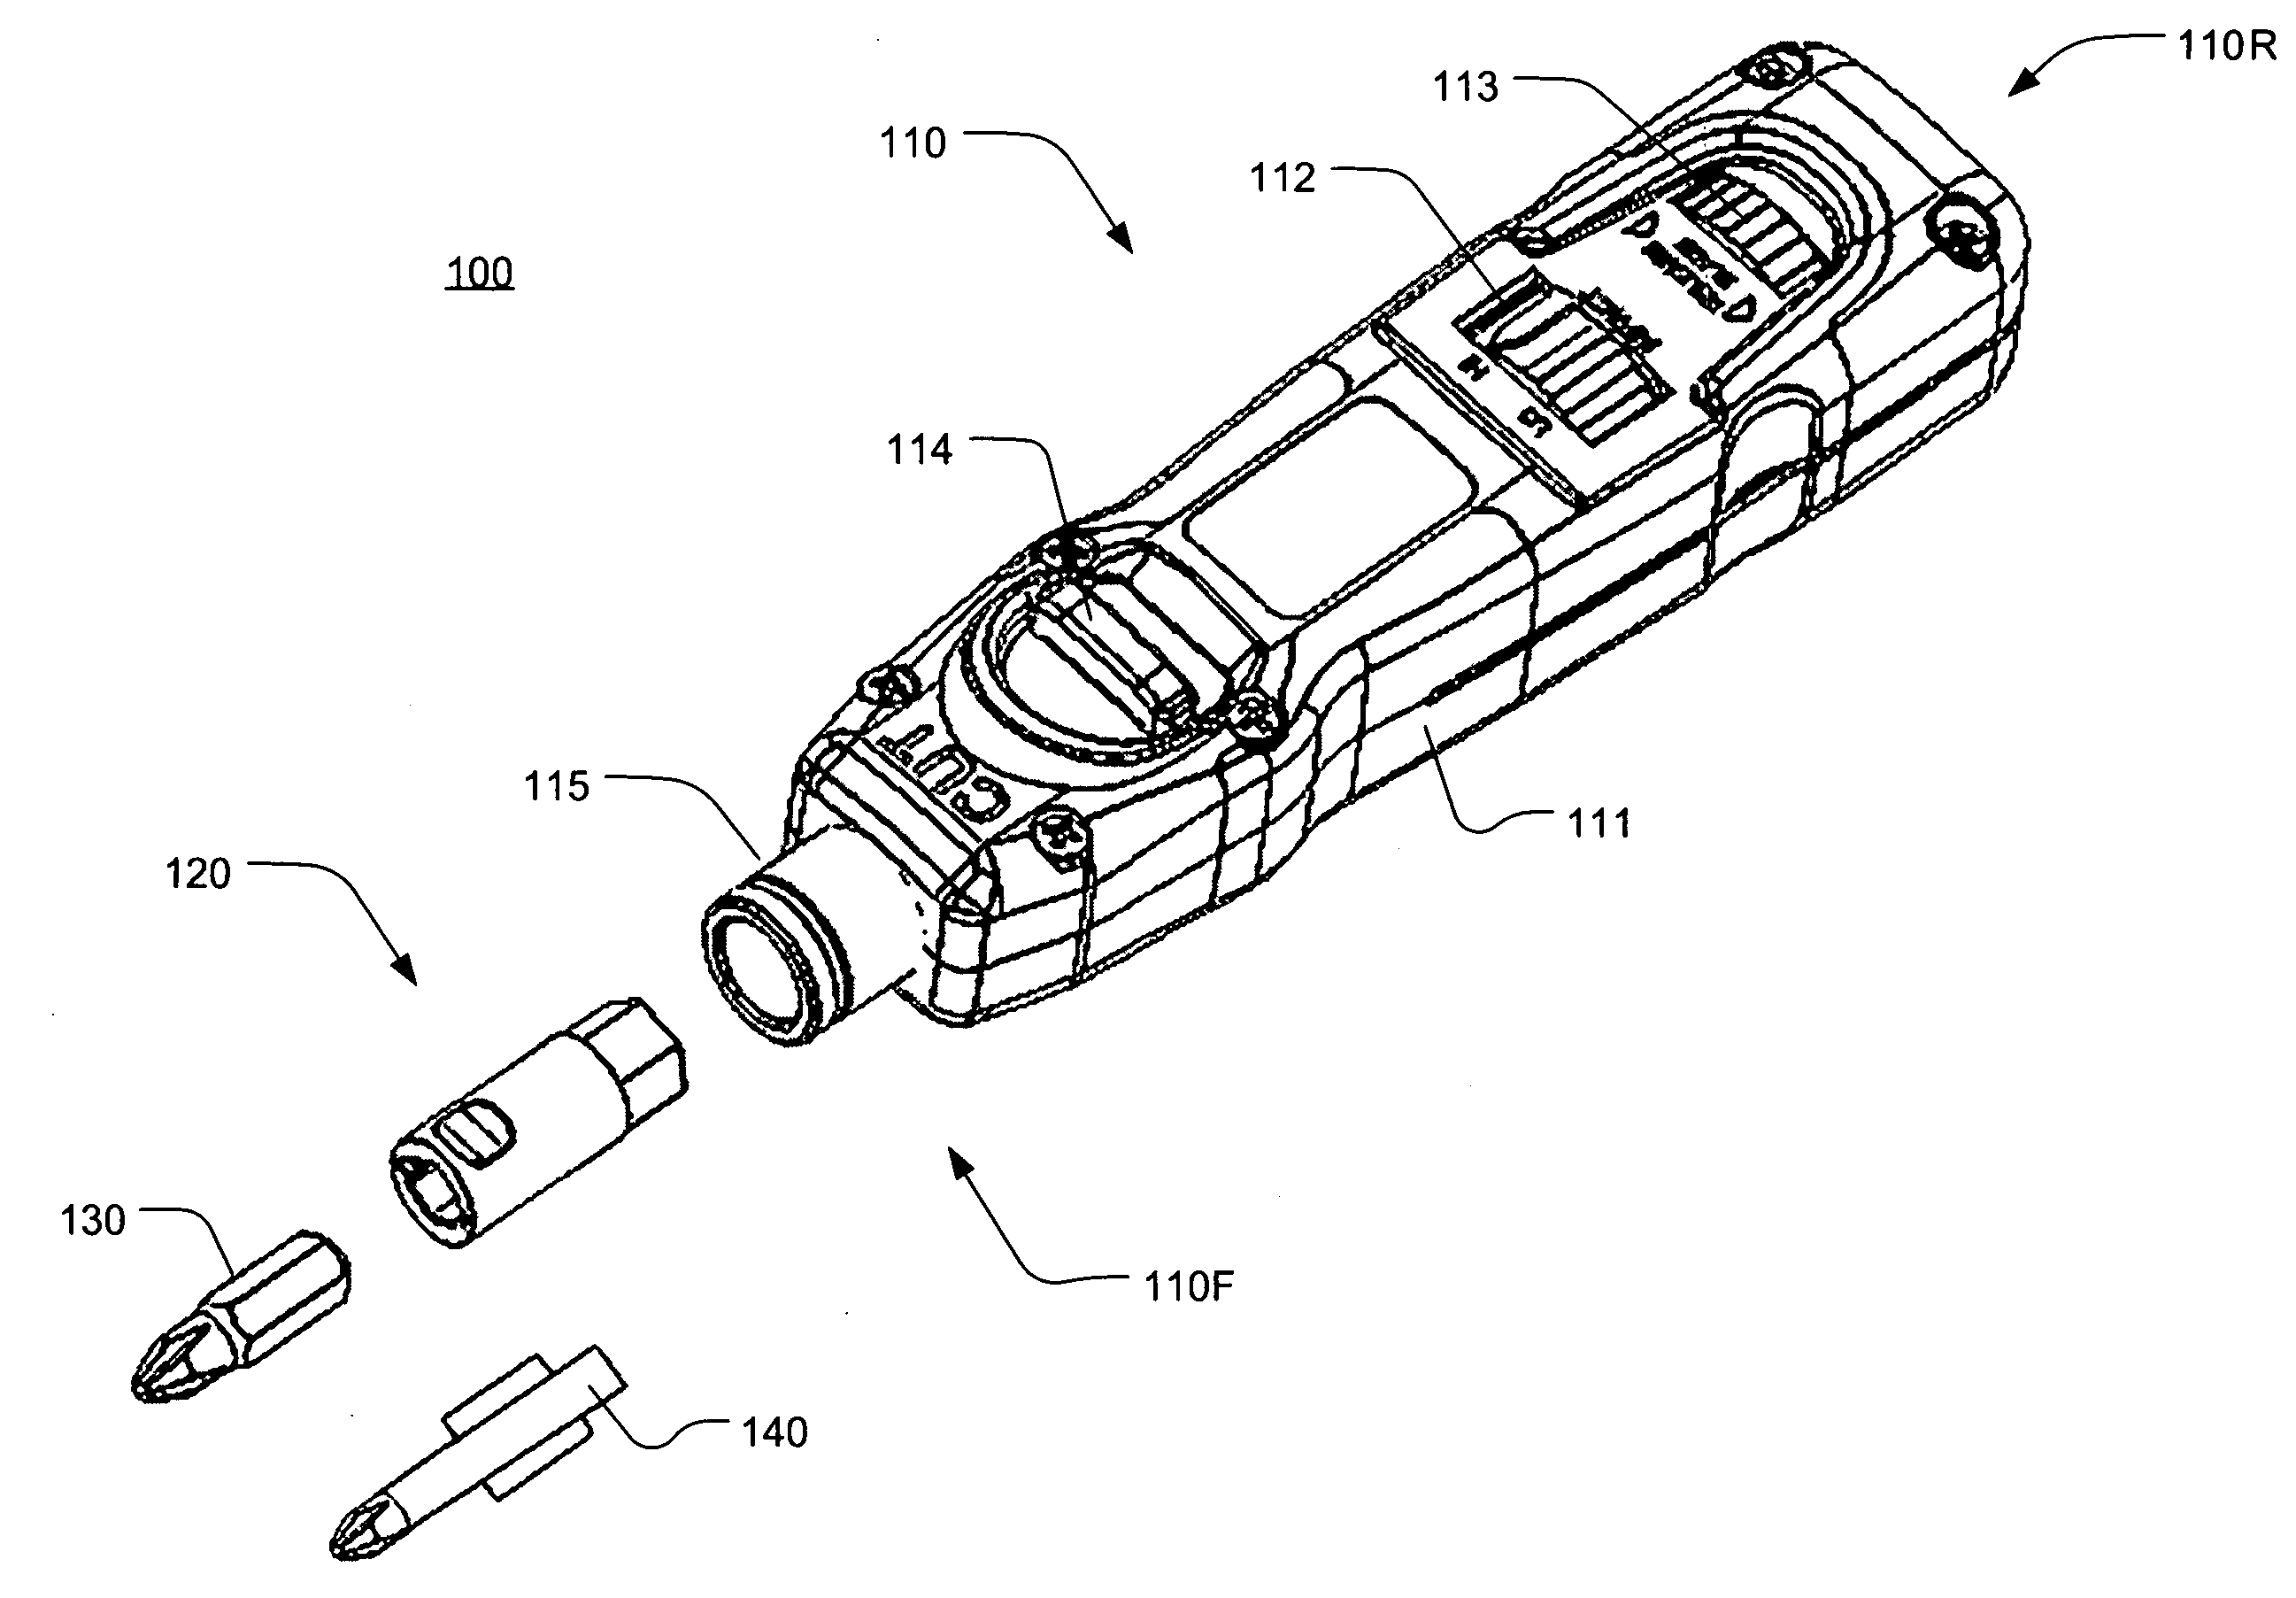 Compound tool with screwdriver attachment